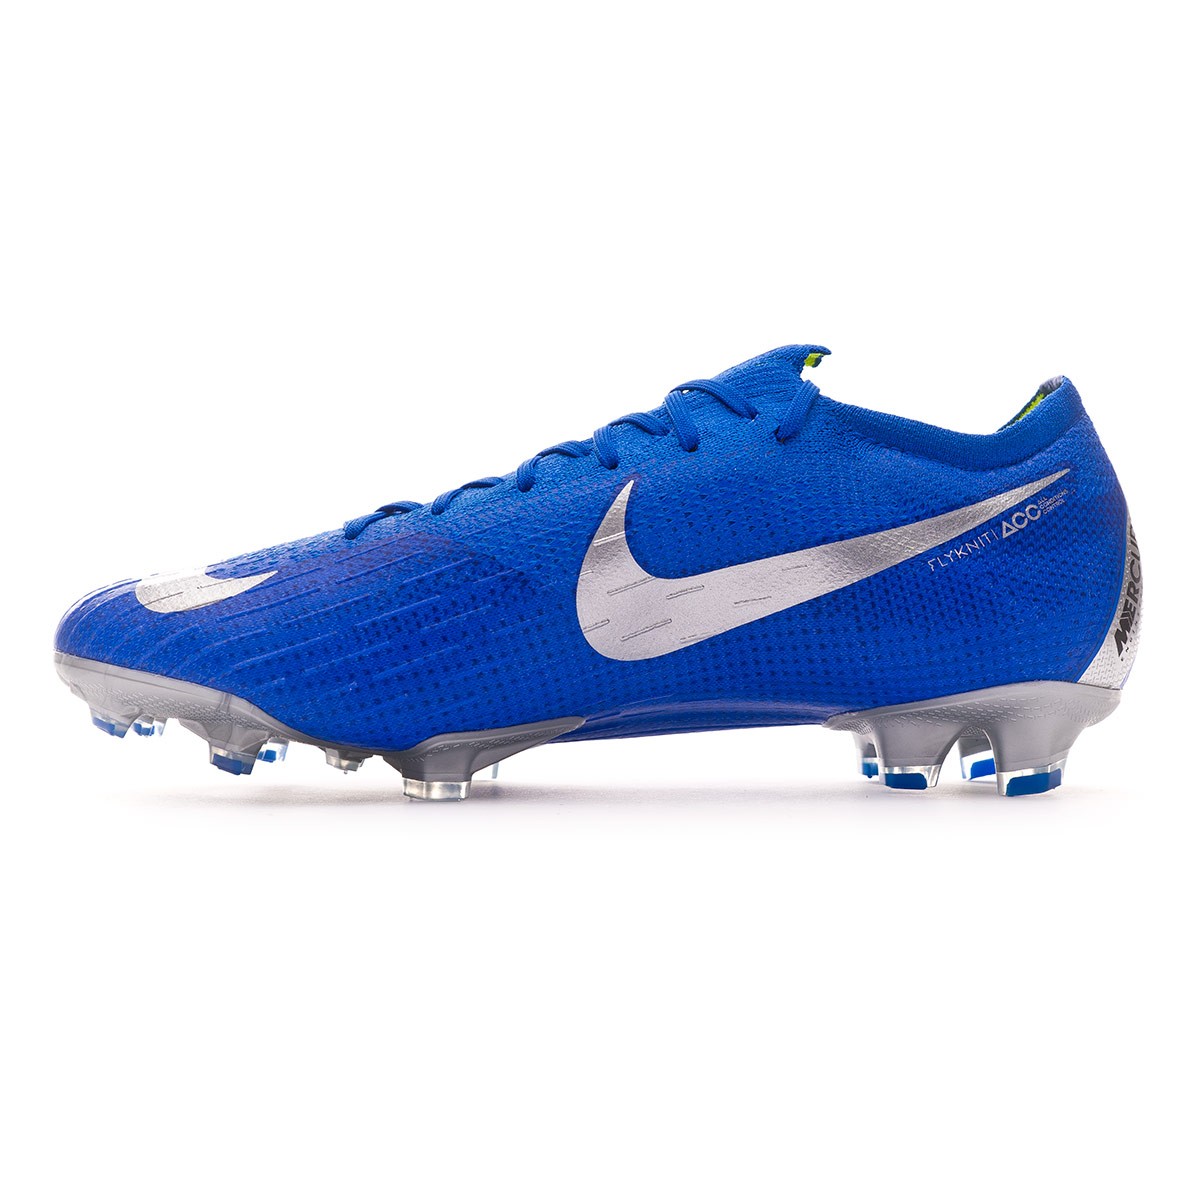 white and blue nike football boots